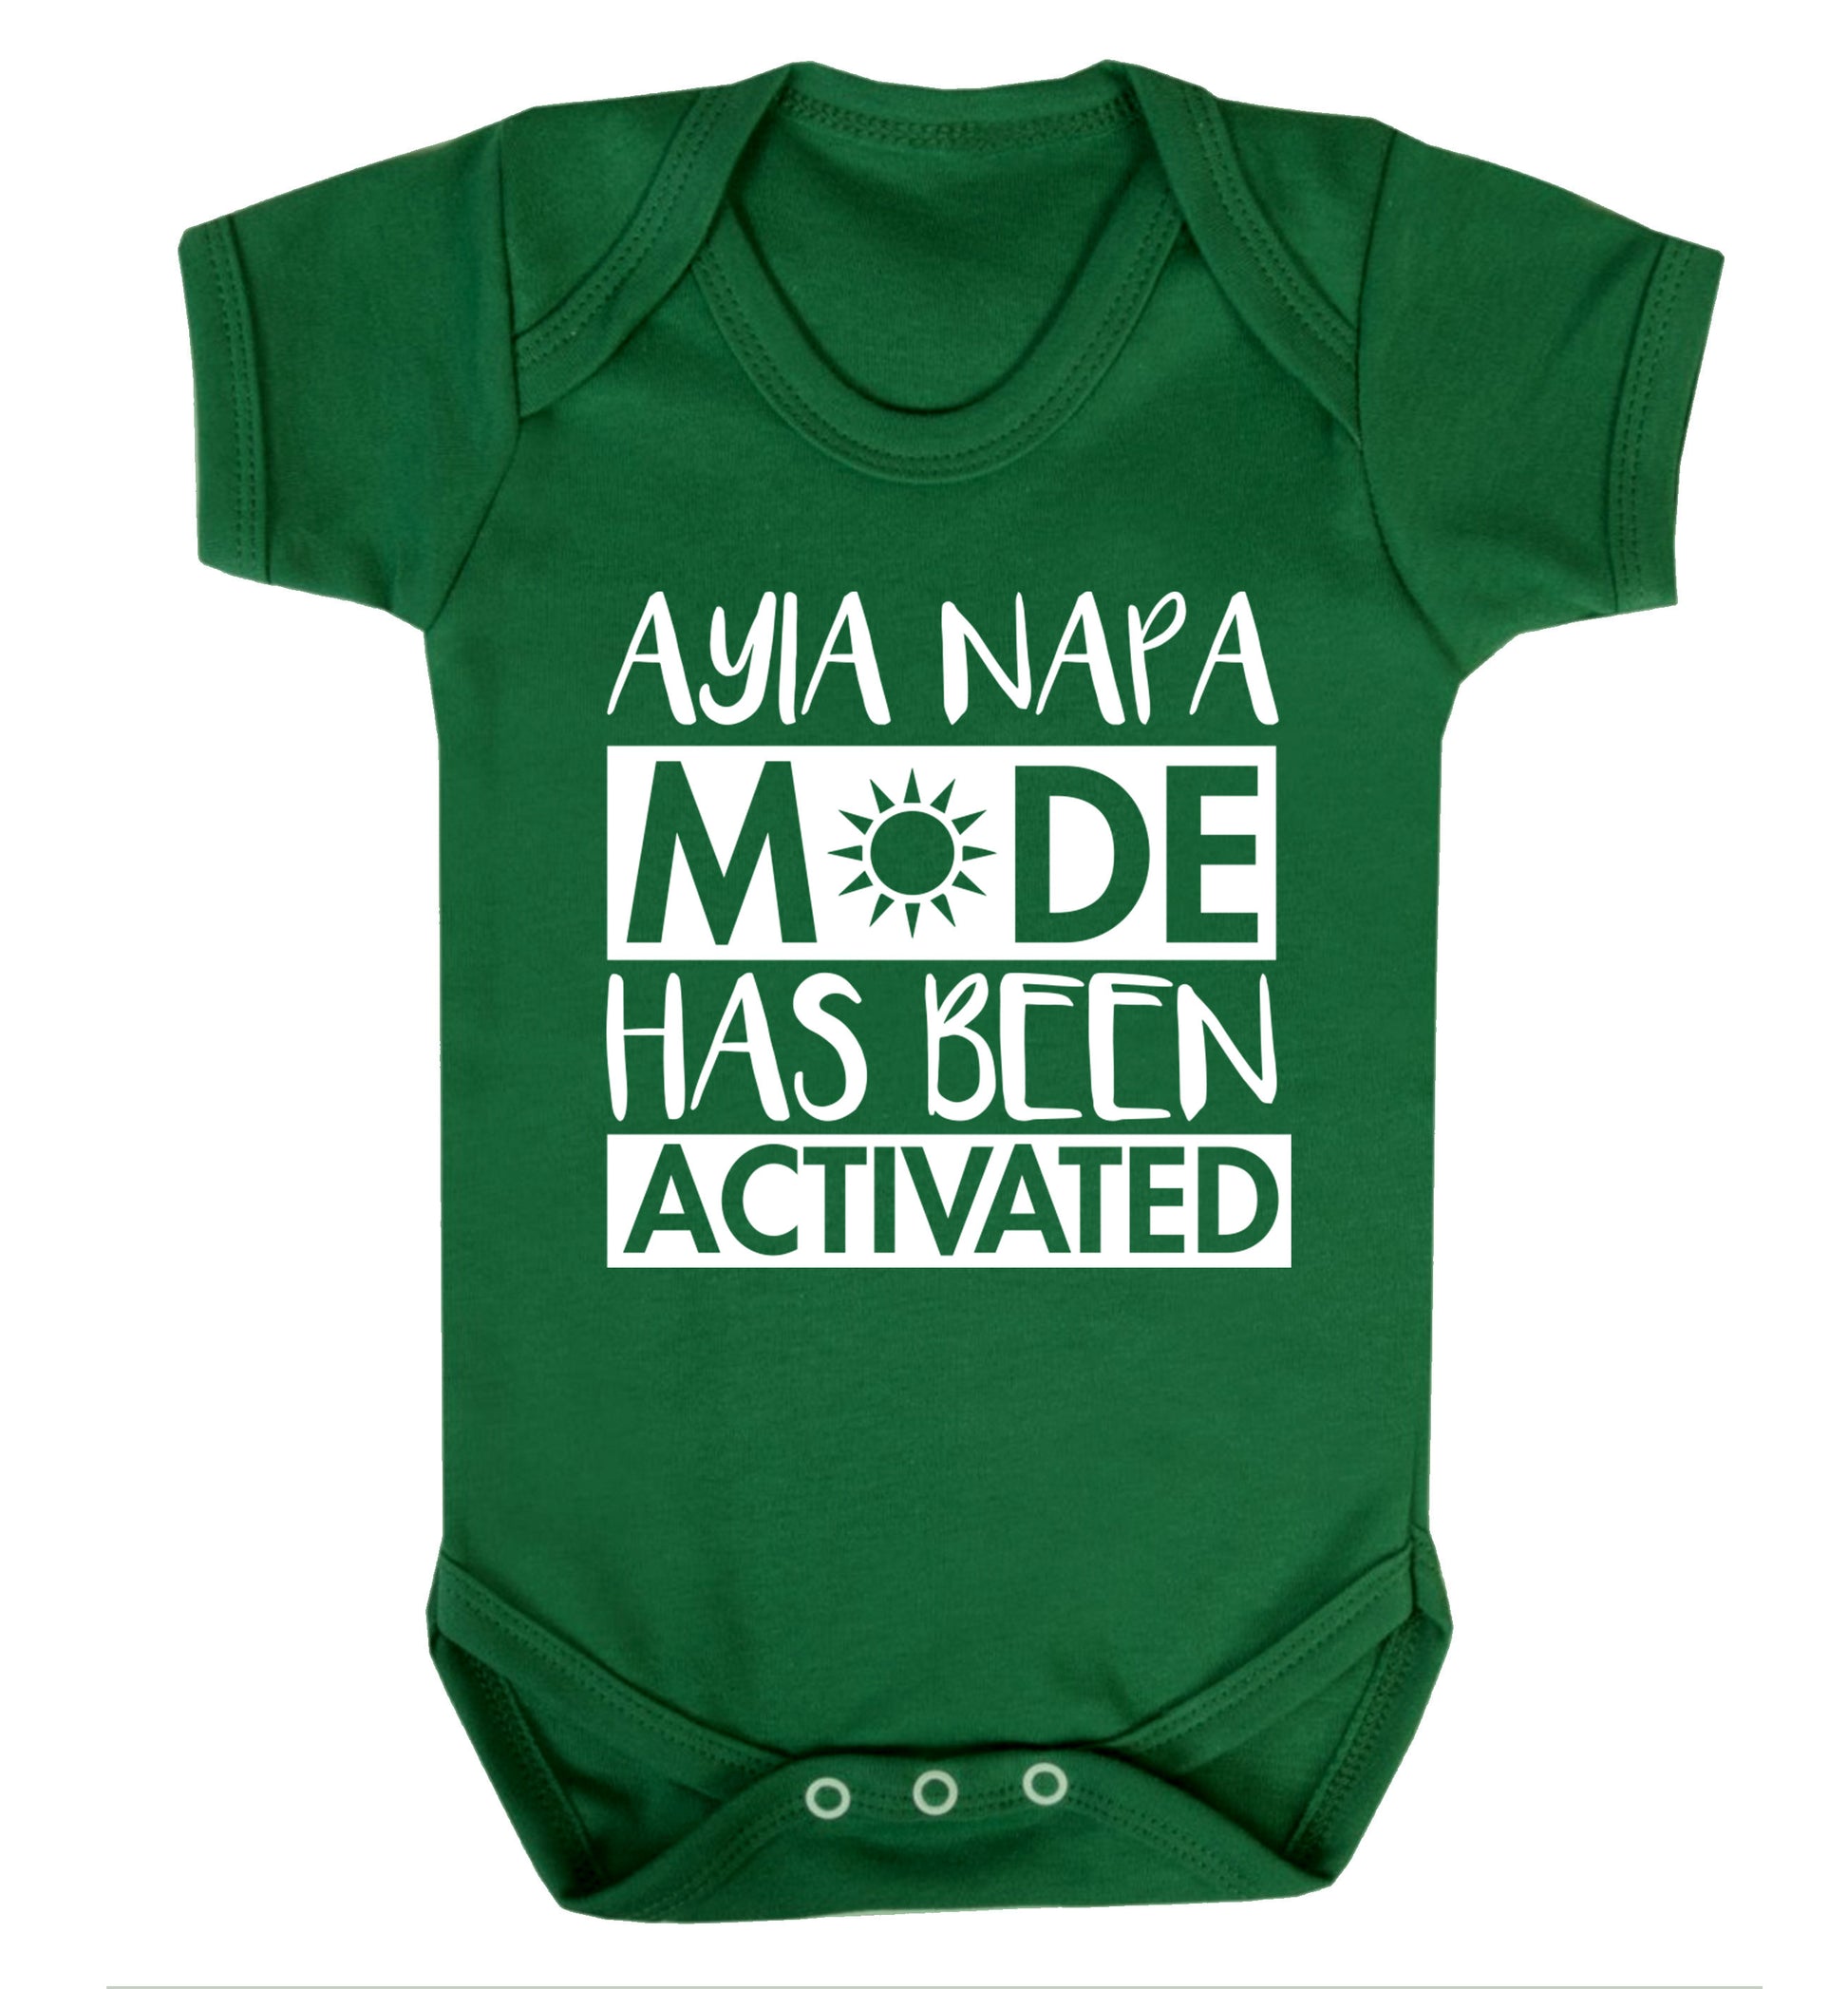 Aiya Napa mode has been activated Baby Vest green 18-24 months